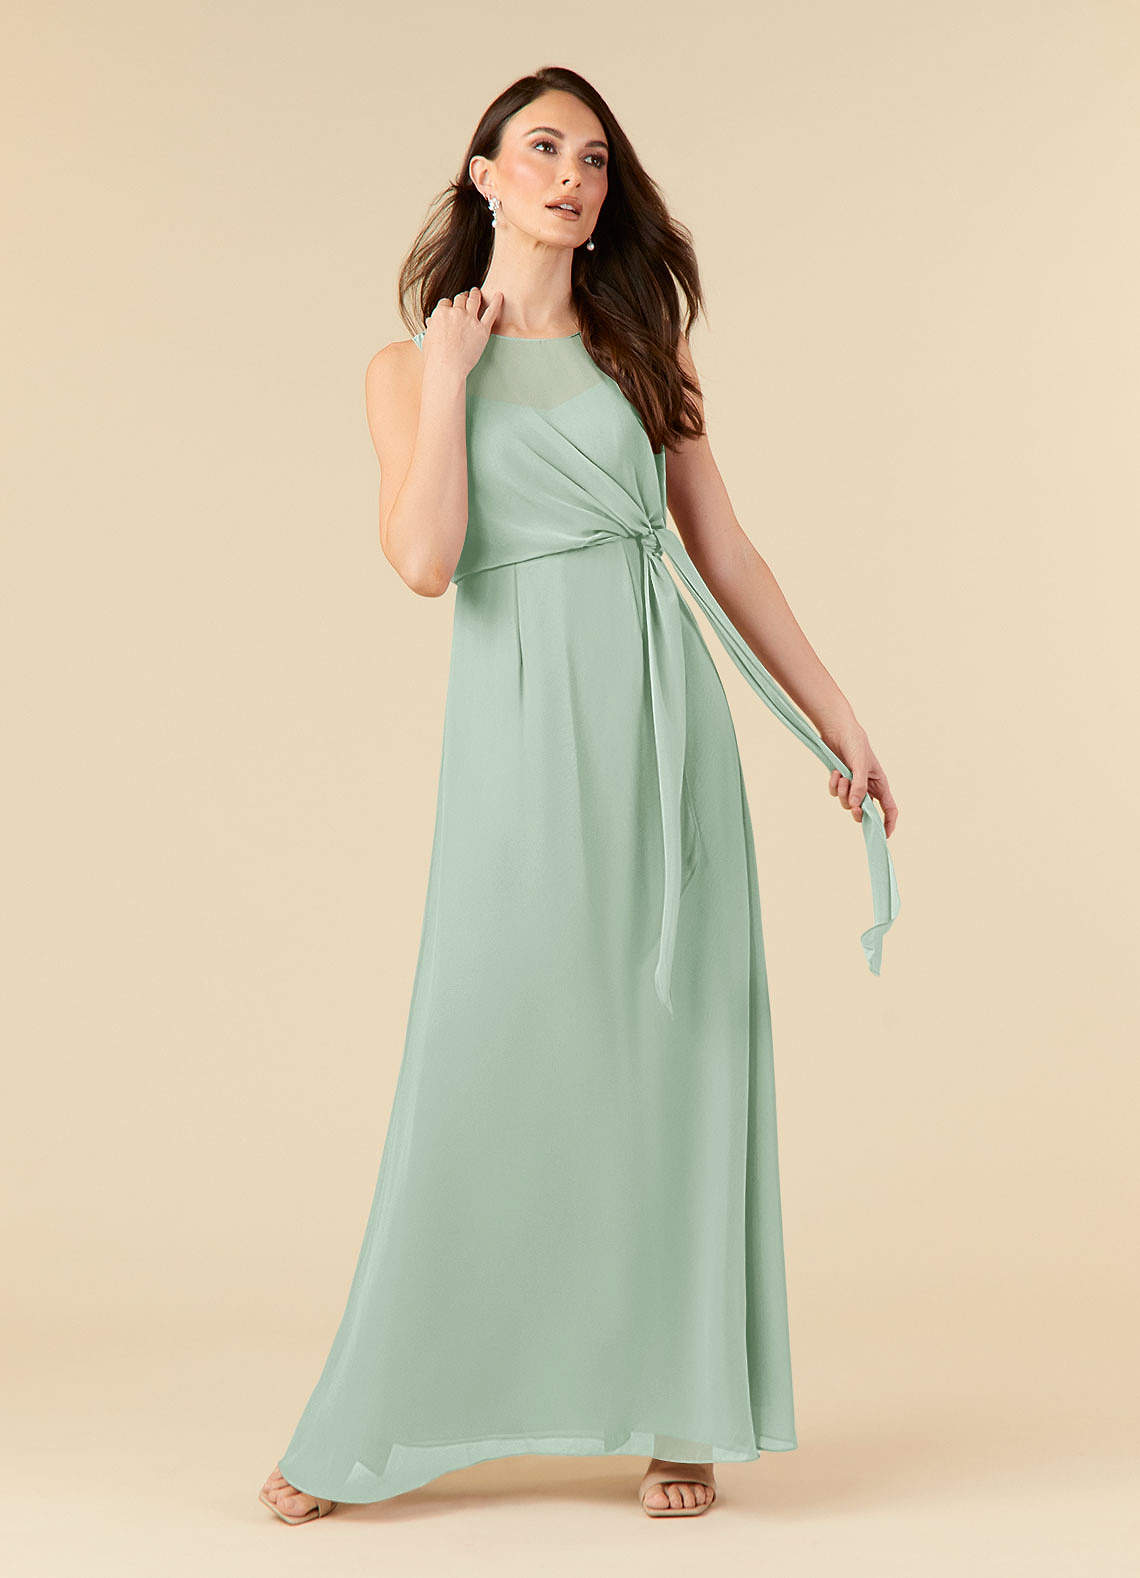 Azazie Marchioness Mother of the Bride Dresses A-Line Scoop Pleated Chiffon Floor-Length Dress image1